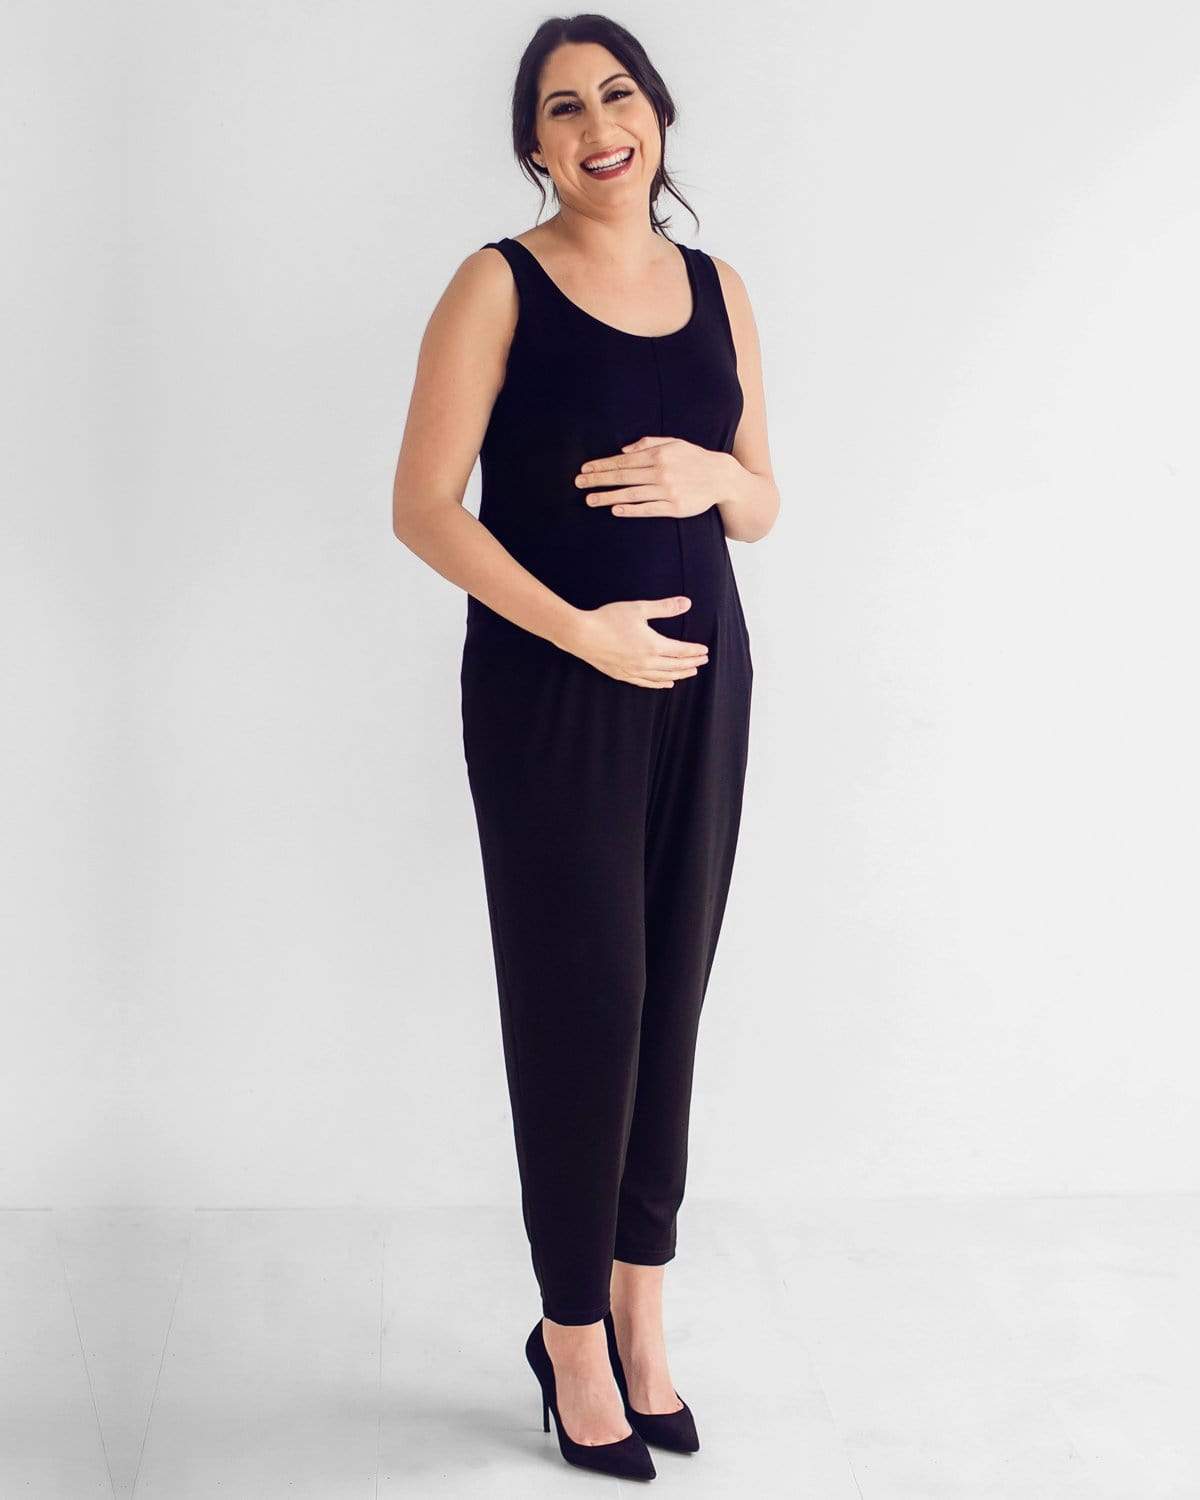 Shop Slimming Jumpsuit Postpartum Belt with great discounts and